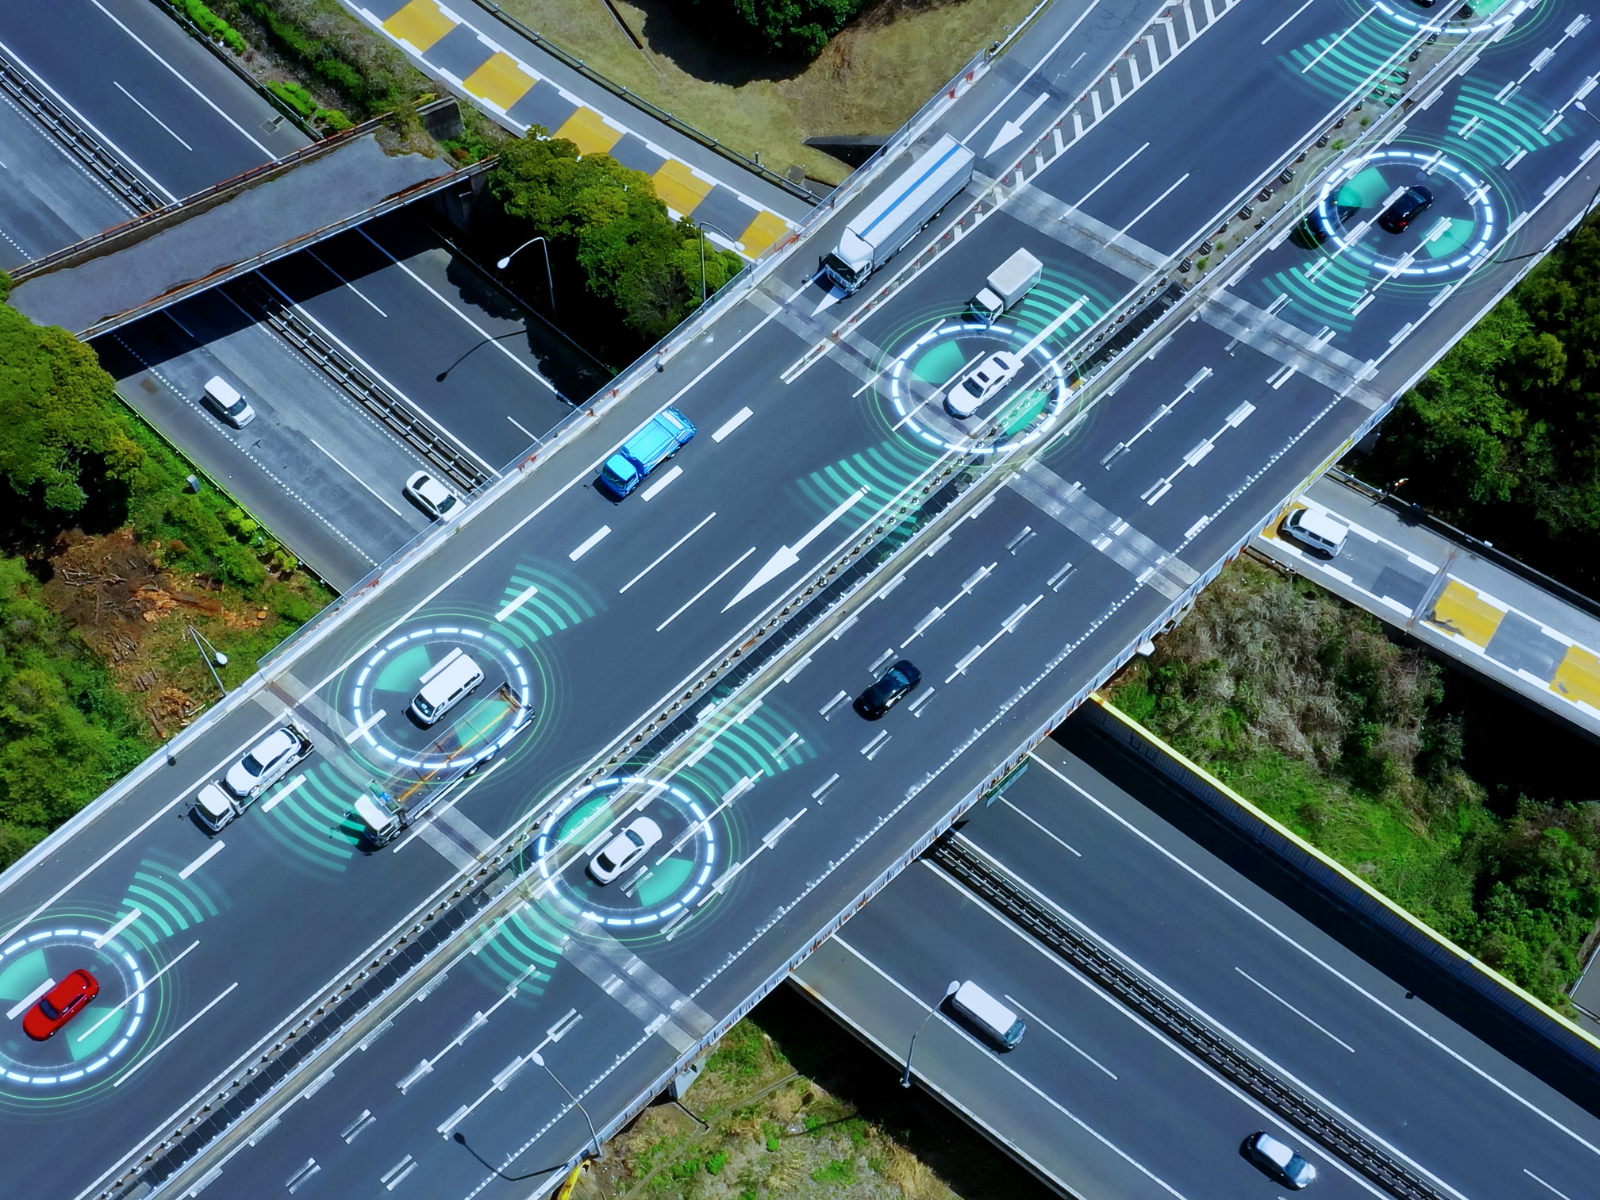 Autonomous vehicles are ultimately expected to enhance safety and efficiency on our roads